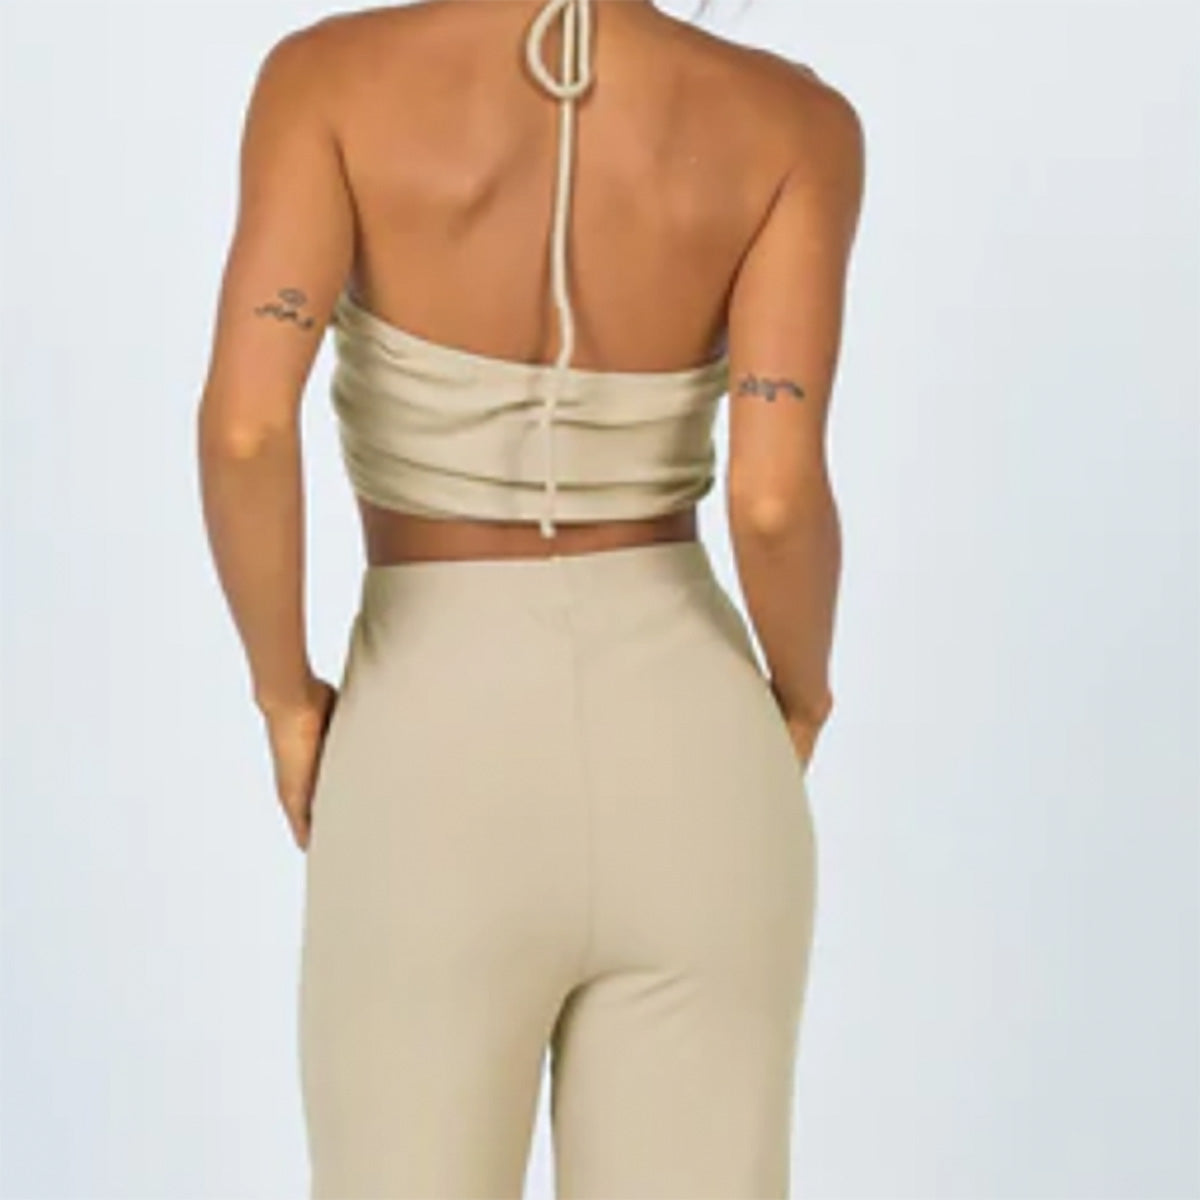 BNWT Princess Polly Latiana Ribbed Crop Top - Beige Size 10